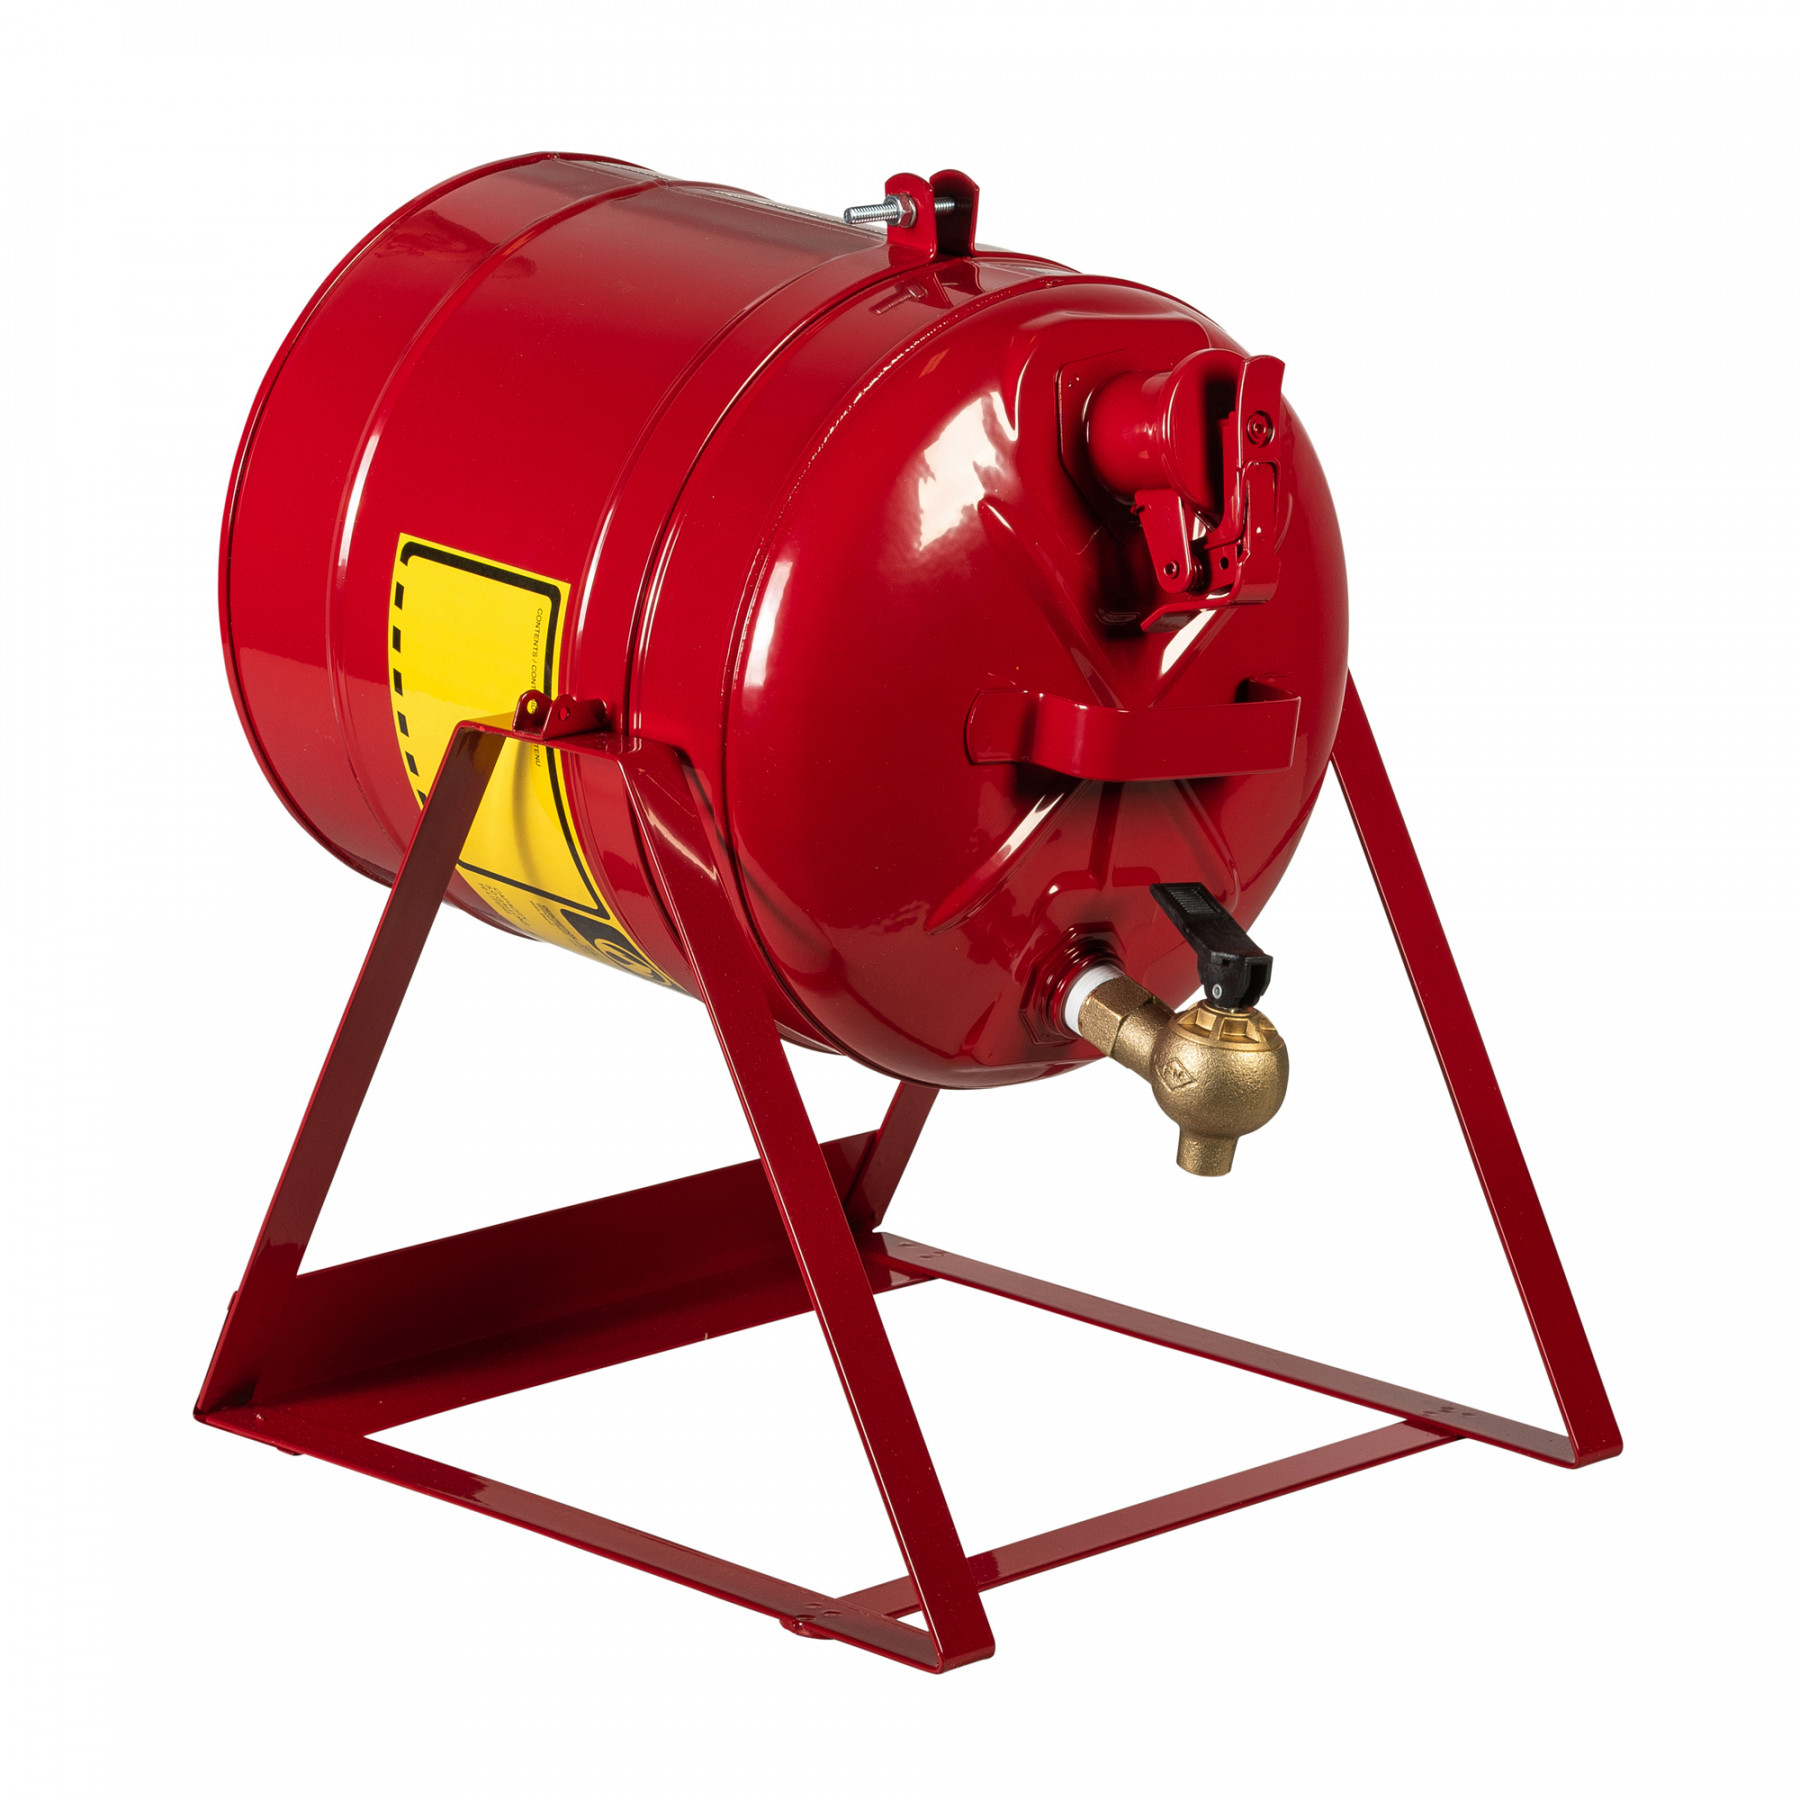 7150146_type-1-safety-can-5-gallon-red-with-tilt-stand-justrite-pour_tilt